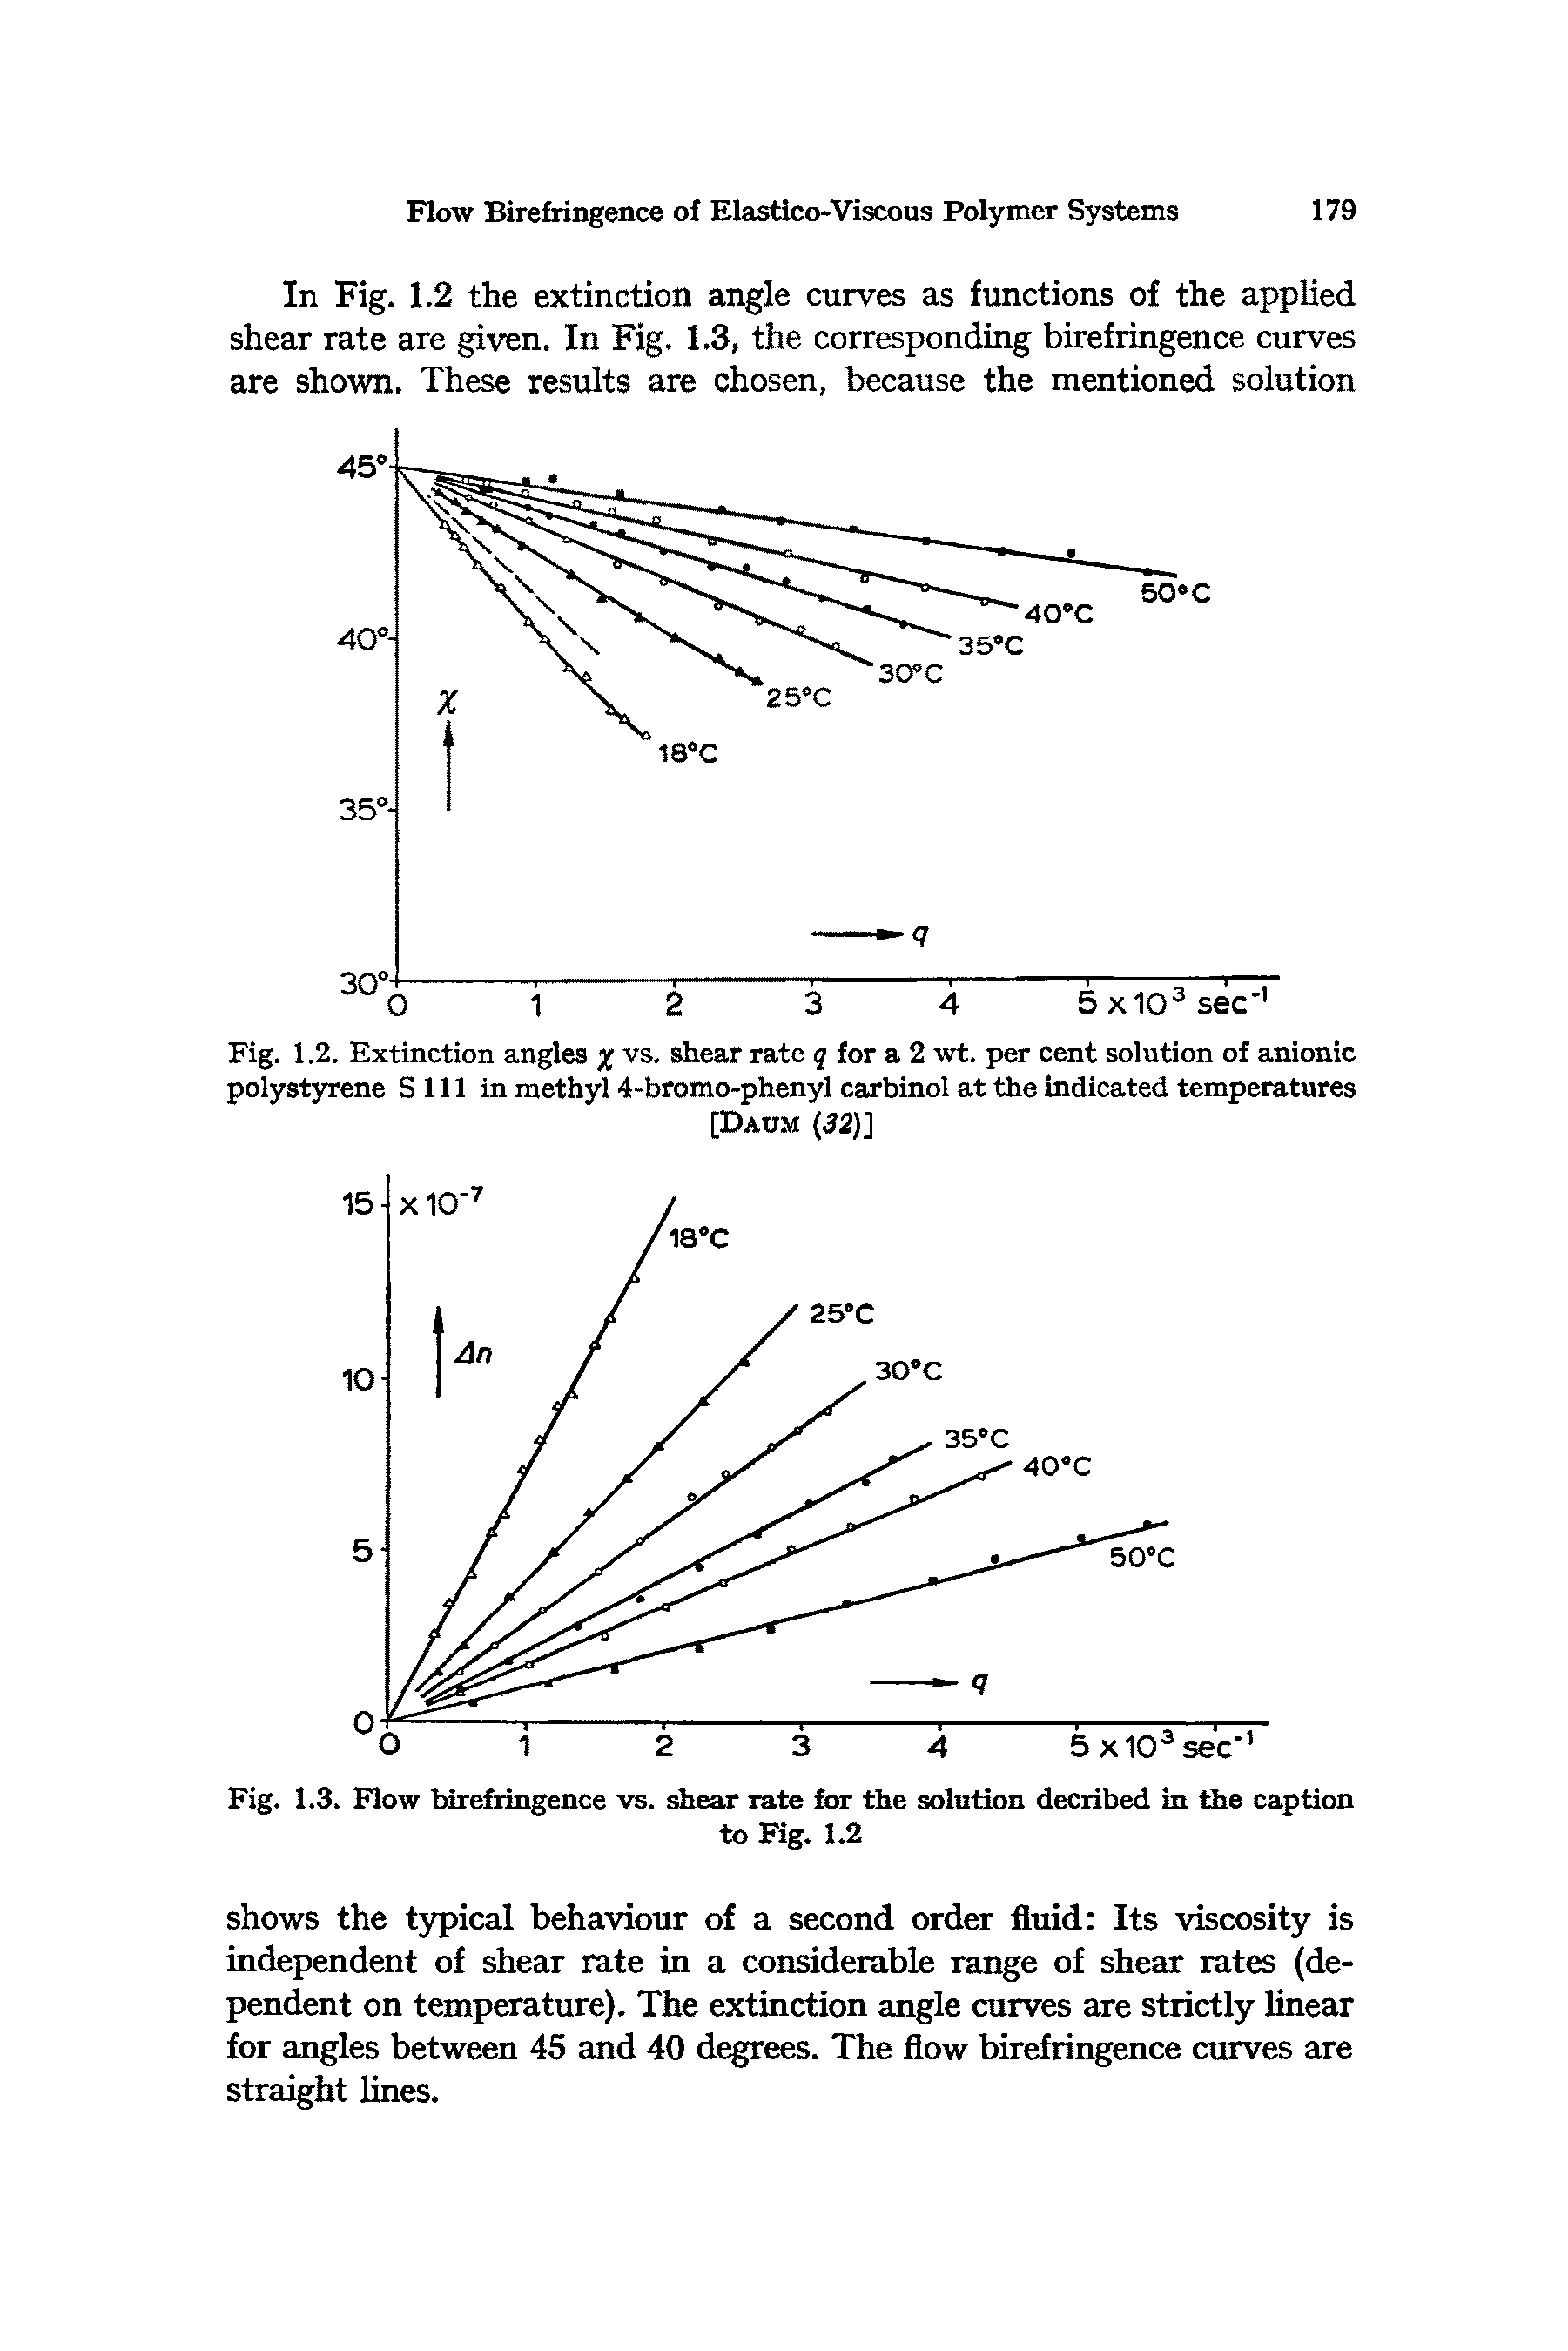 Fig. 1.2. Extinction angles % vs. shear rate q for a 2 wt. per cent solution of anionic polystyrene Sill in methyl 4-bromo-phenyl carbinol at the indicated temperatures...